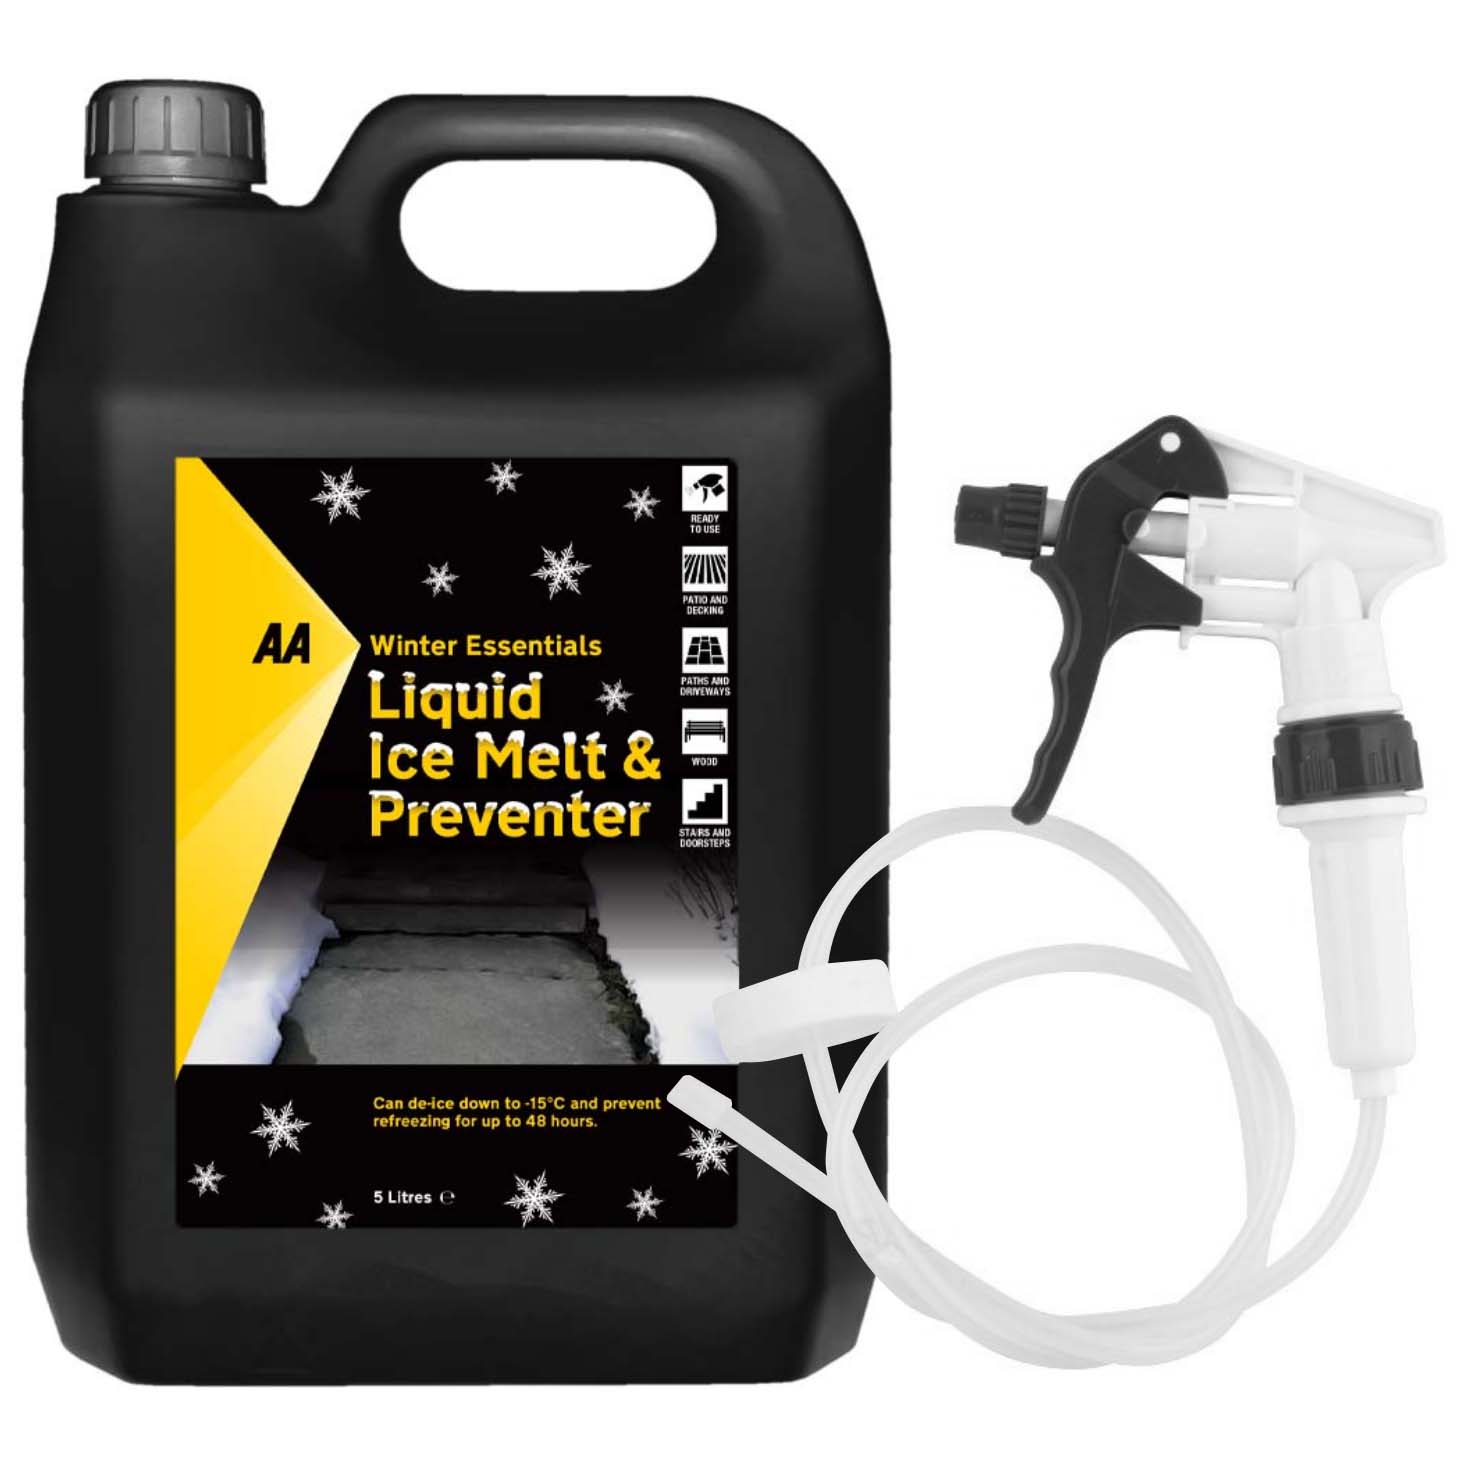 AA Liquid Ice Melt & Preventer 5L (with Long Hose Trigger)